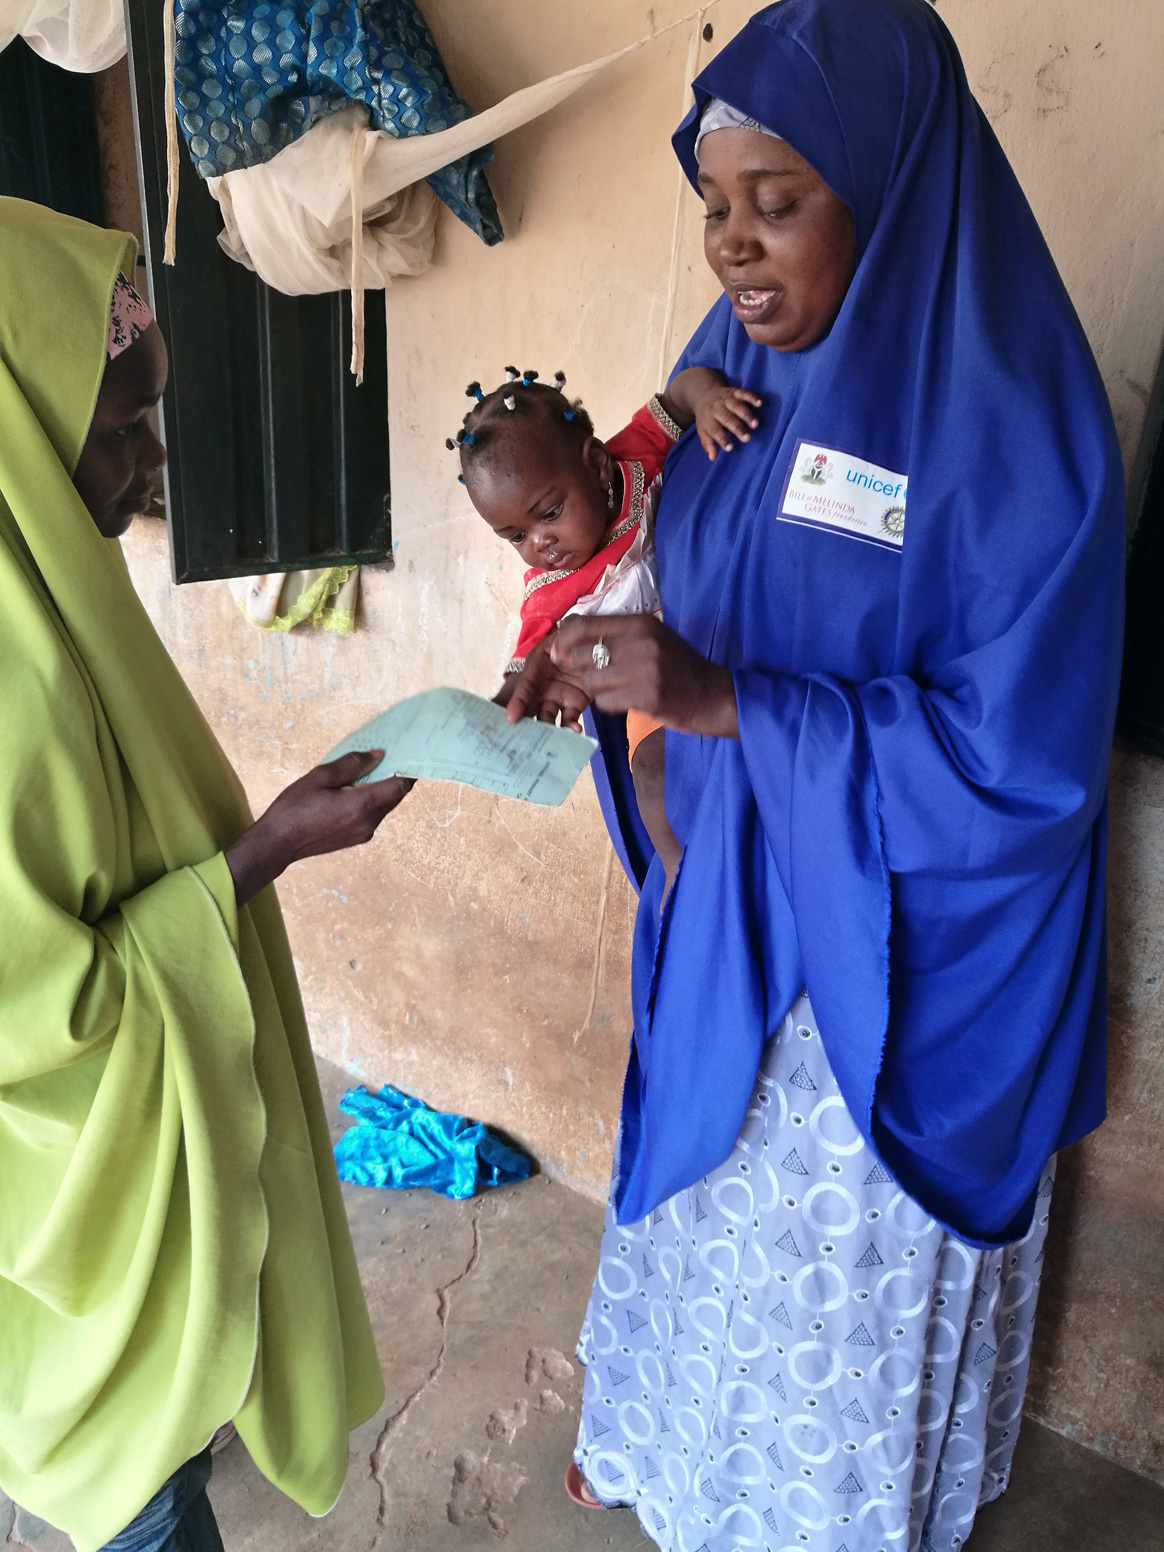 Hauwa inspects a baby’s vaccination card. By building up trusting relationships with her community, her health advice gains credibility. © UNICEF/Nigeria